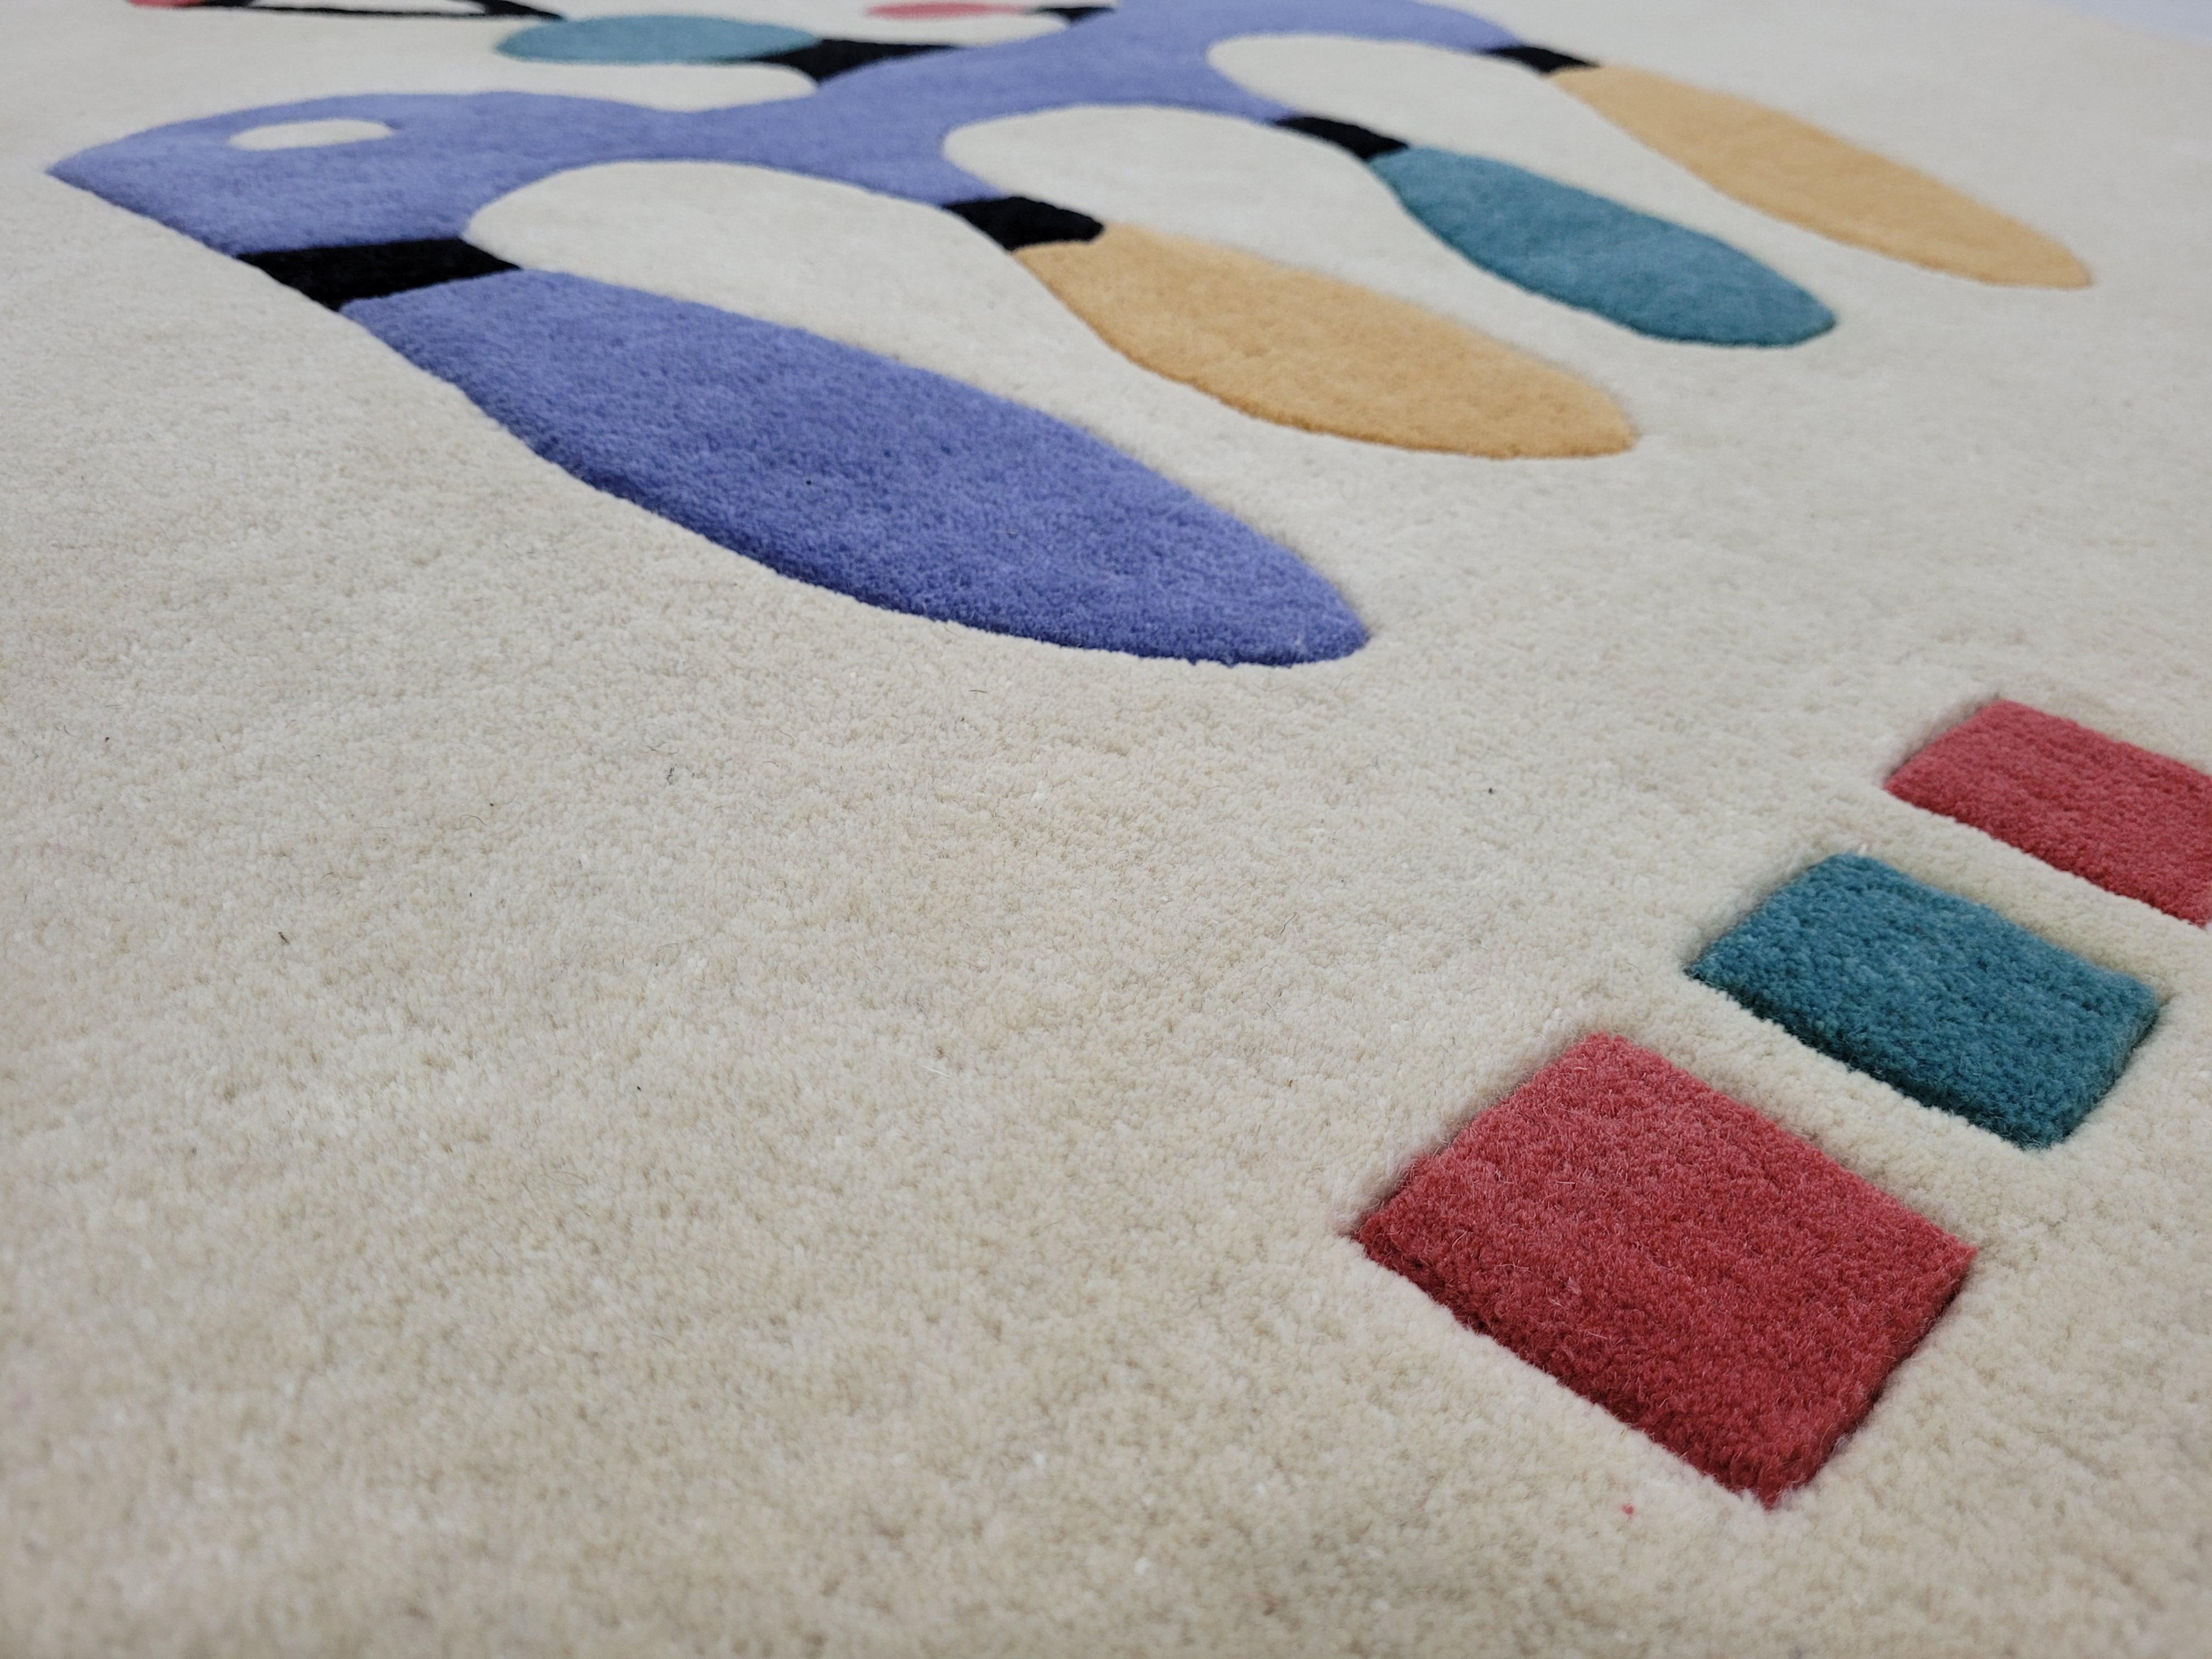 Bauhaus Custom Hand Tufted Rug, after Wassily Kandinsky “Composition” (1944) Limited Ed. For Sale